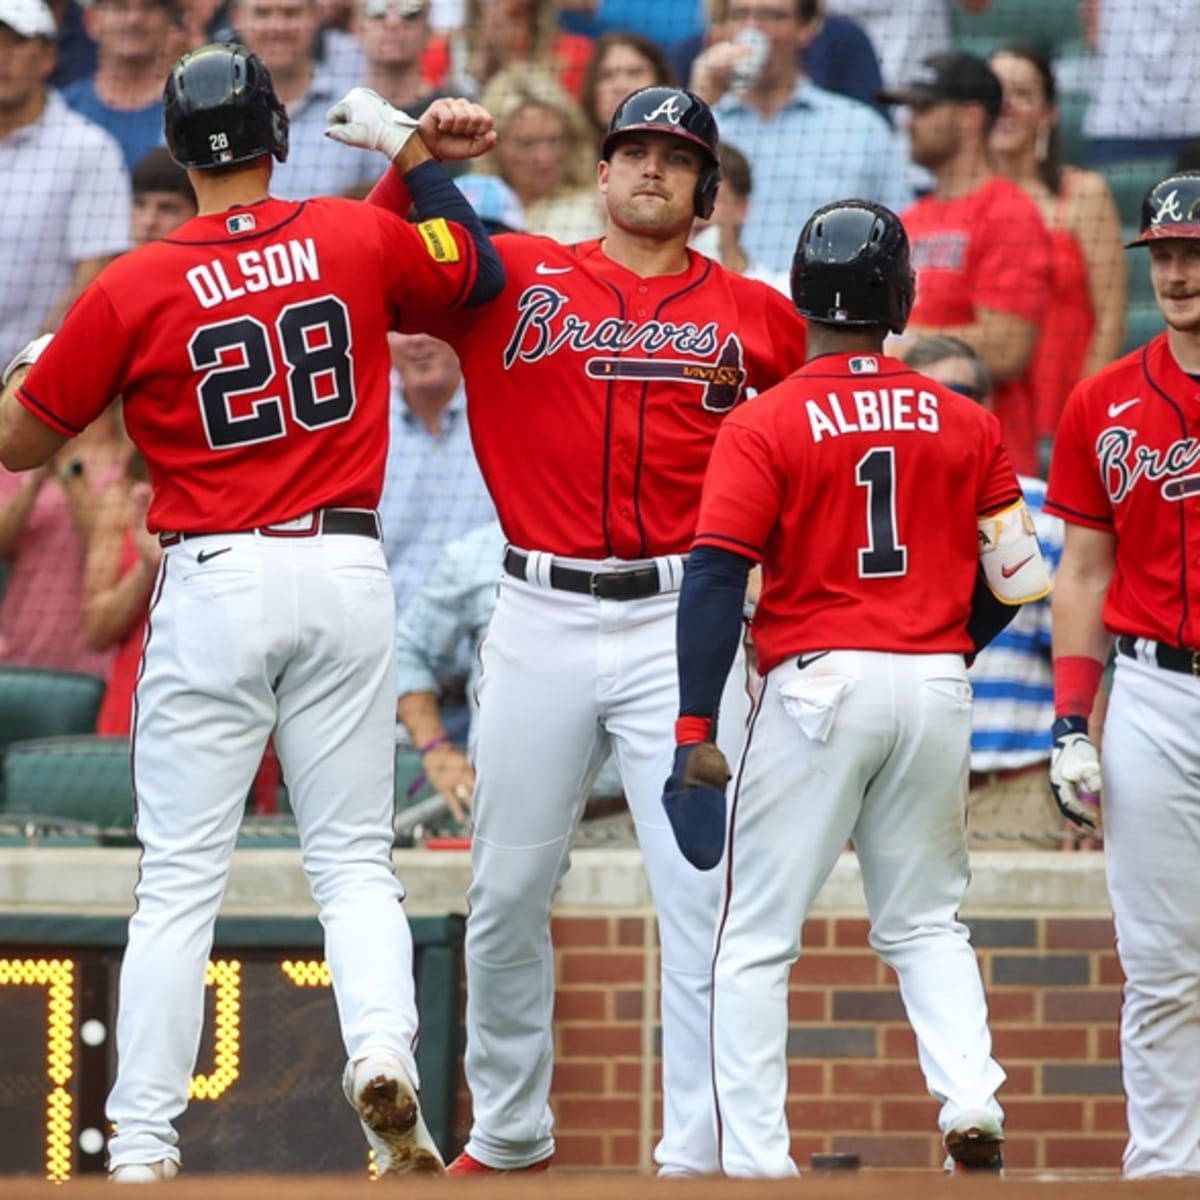 The Atlanta Braves Are Going to Shatter Another Home Run Record - Fastball